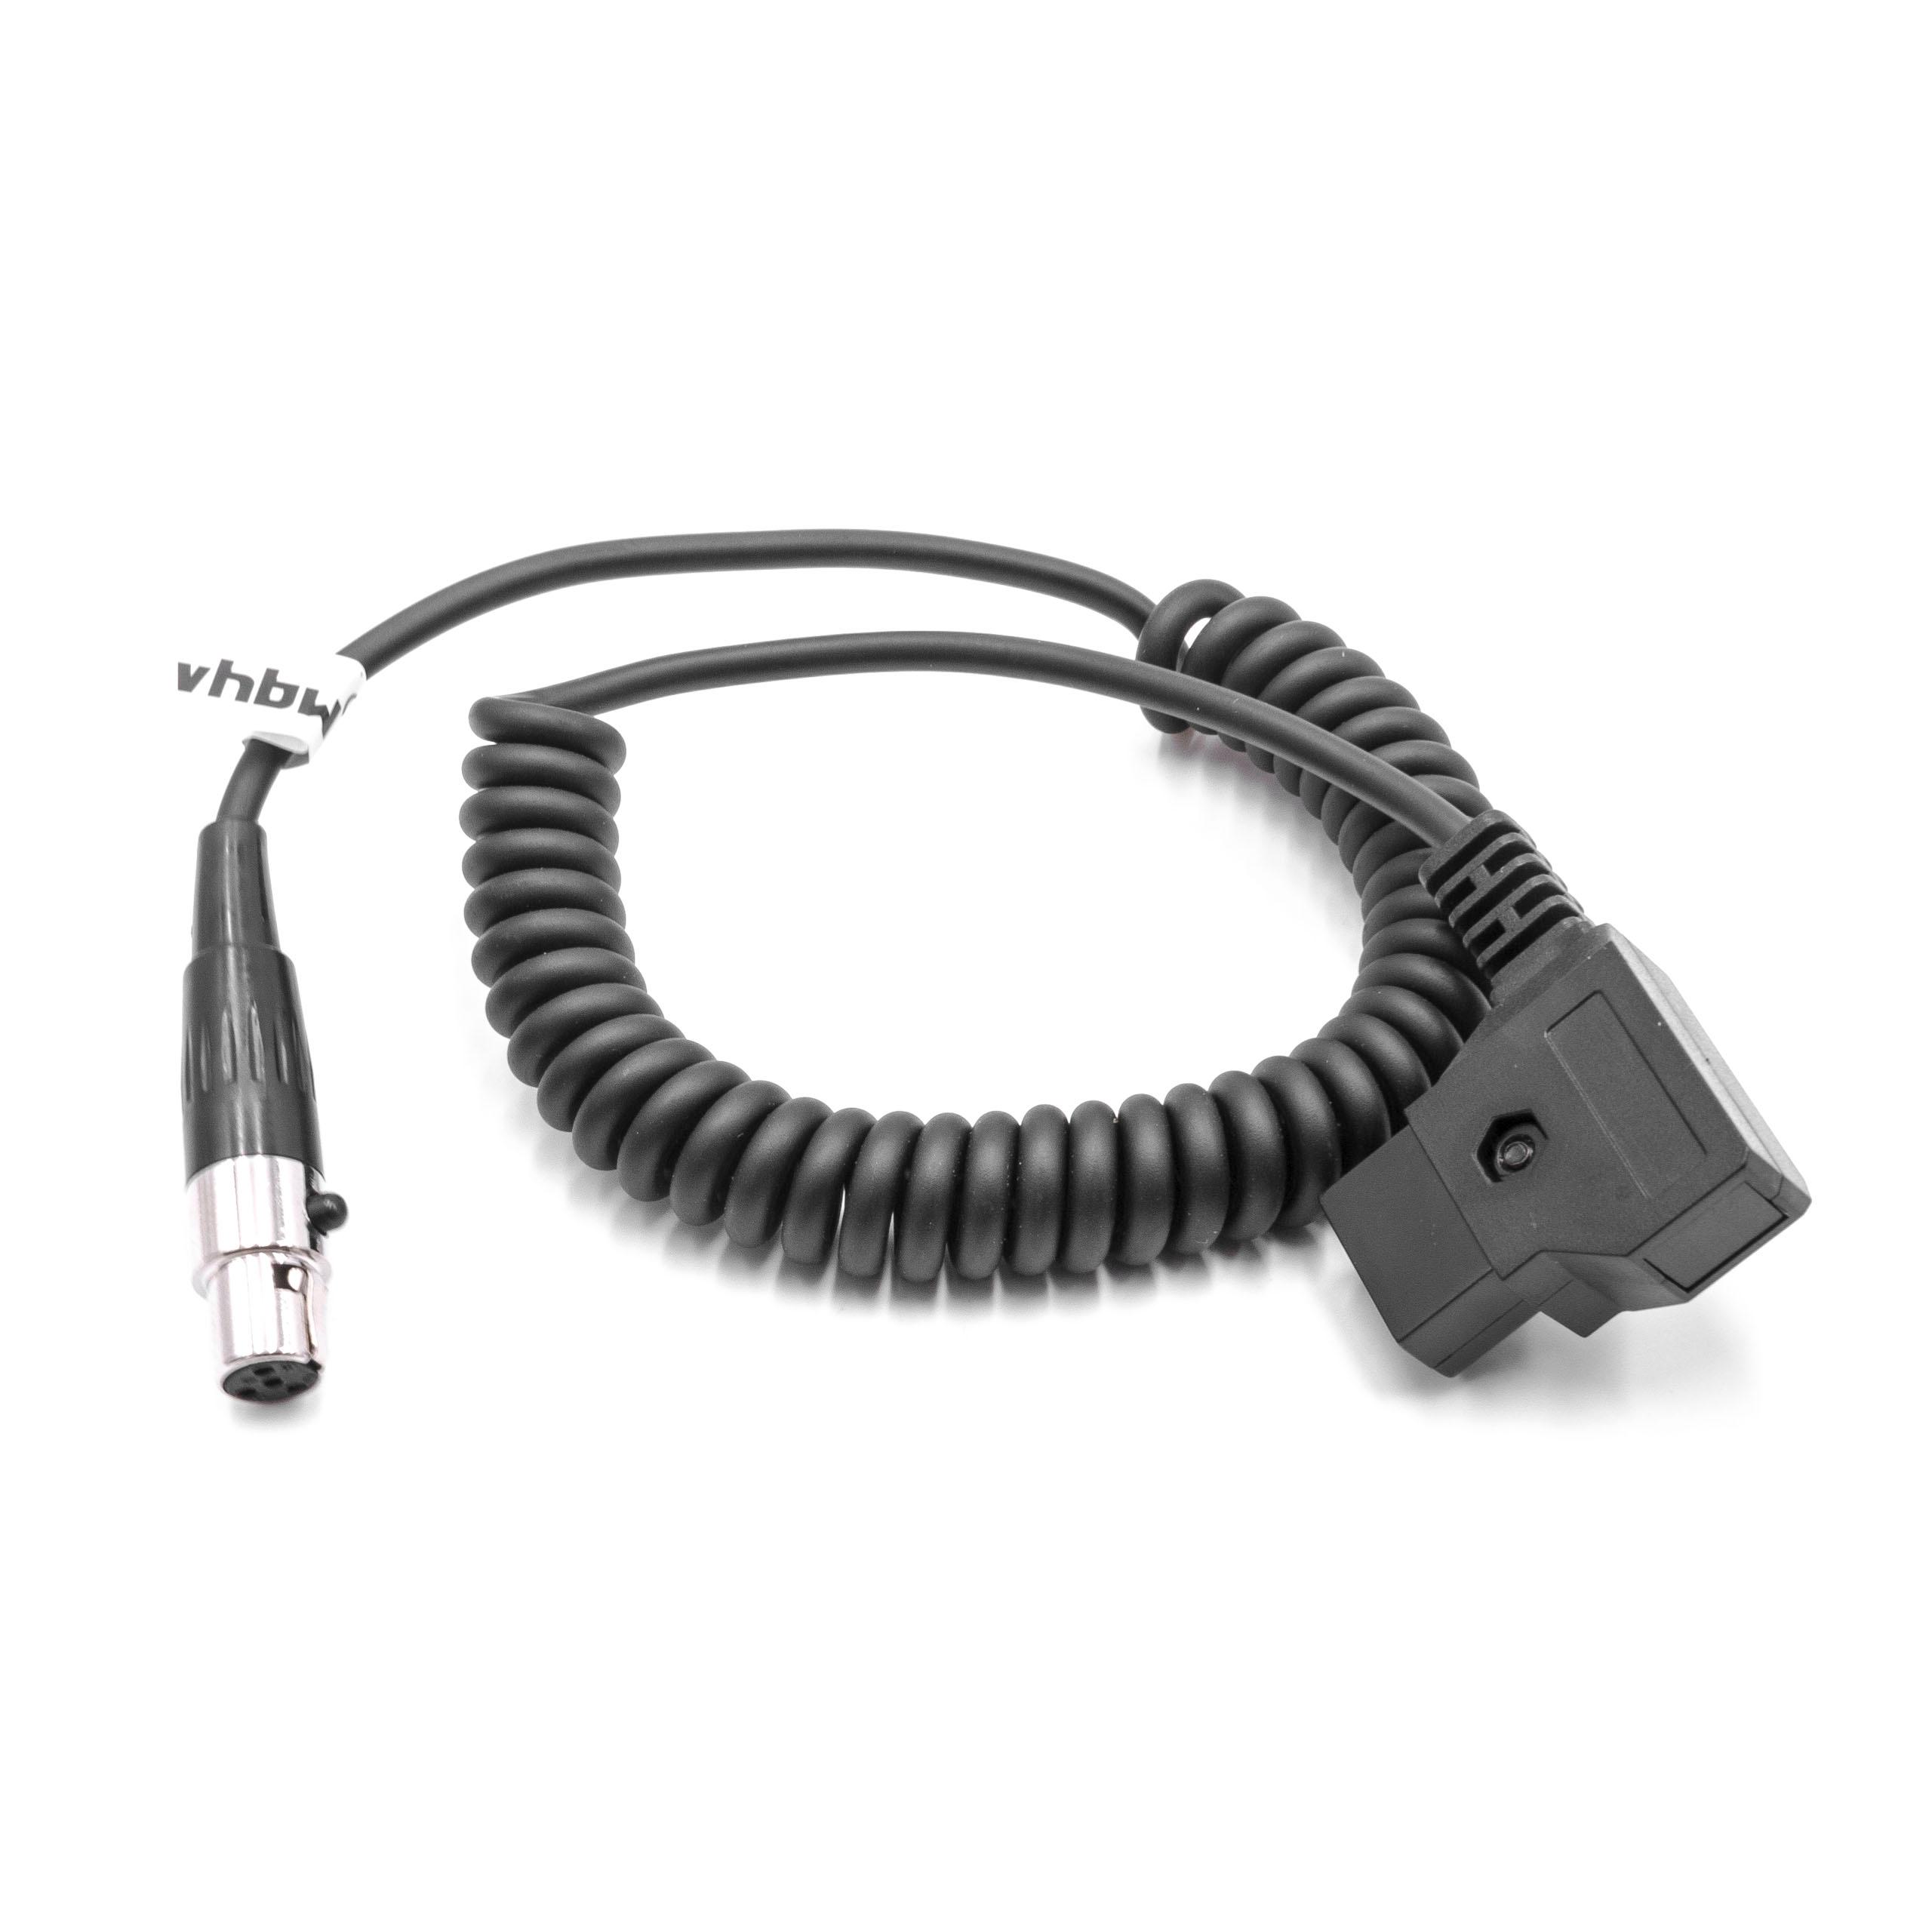 vhbw Power Cable D-Tap to Mini XLR Plug 4-Pin for Camcorder, Camera - Spiral Cable, Black